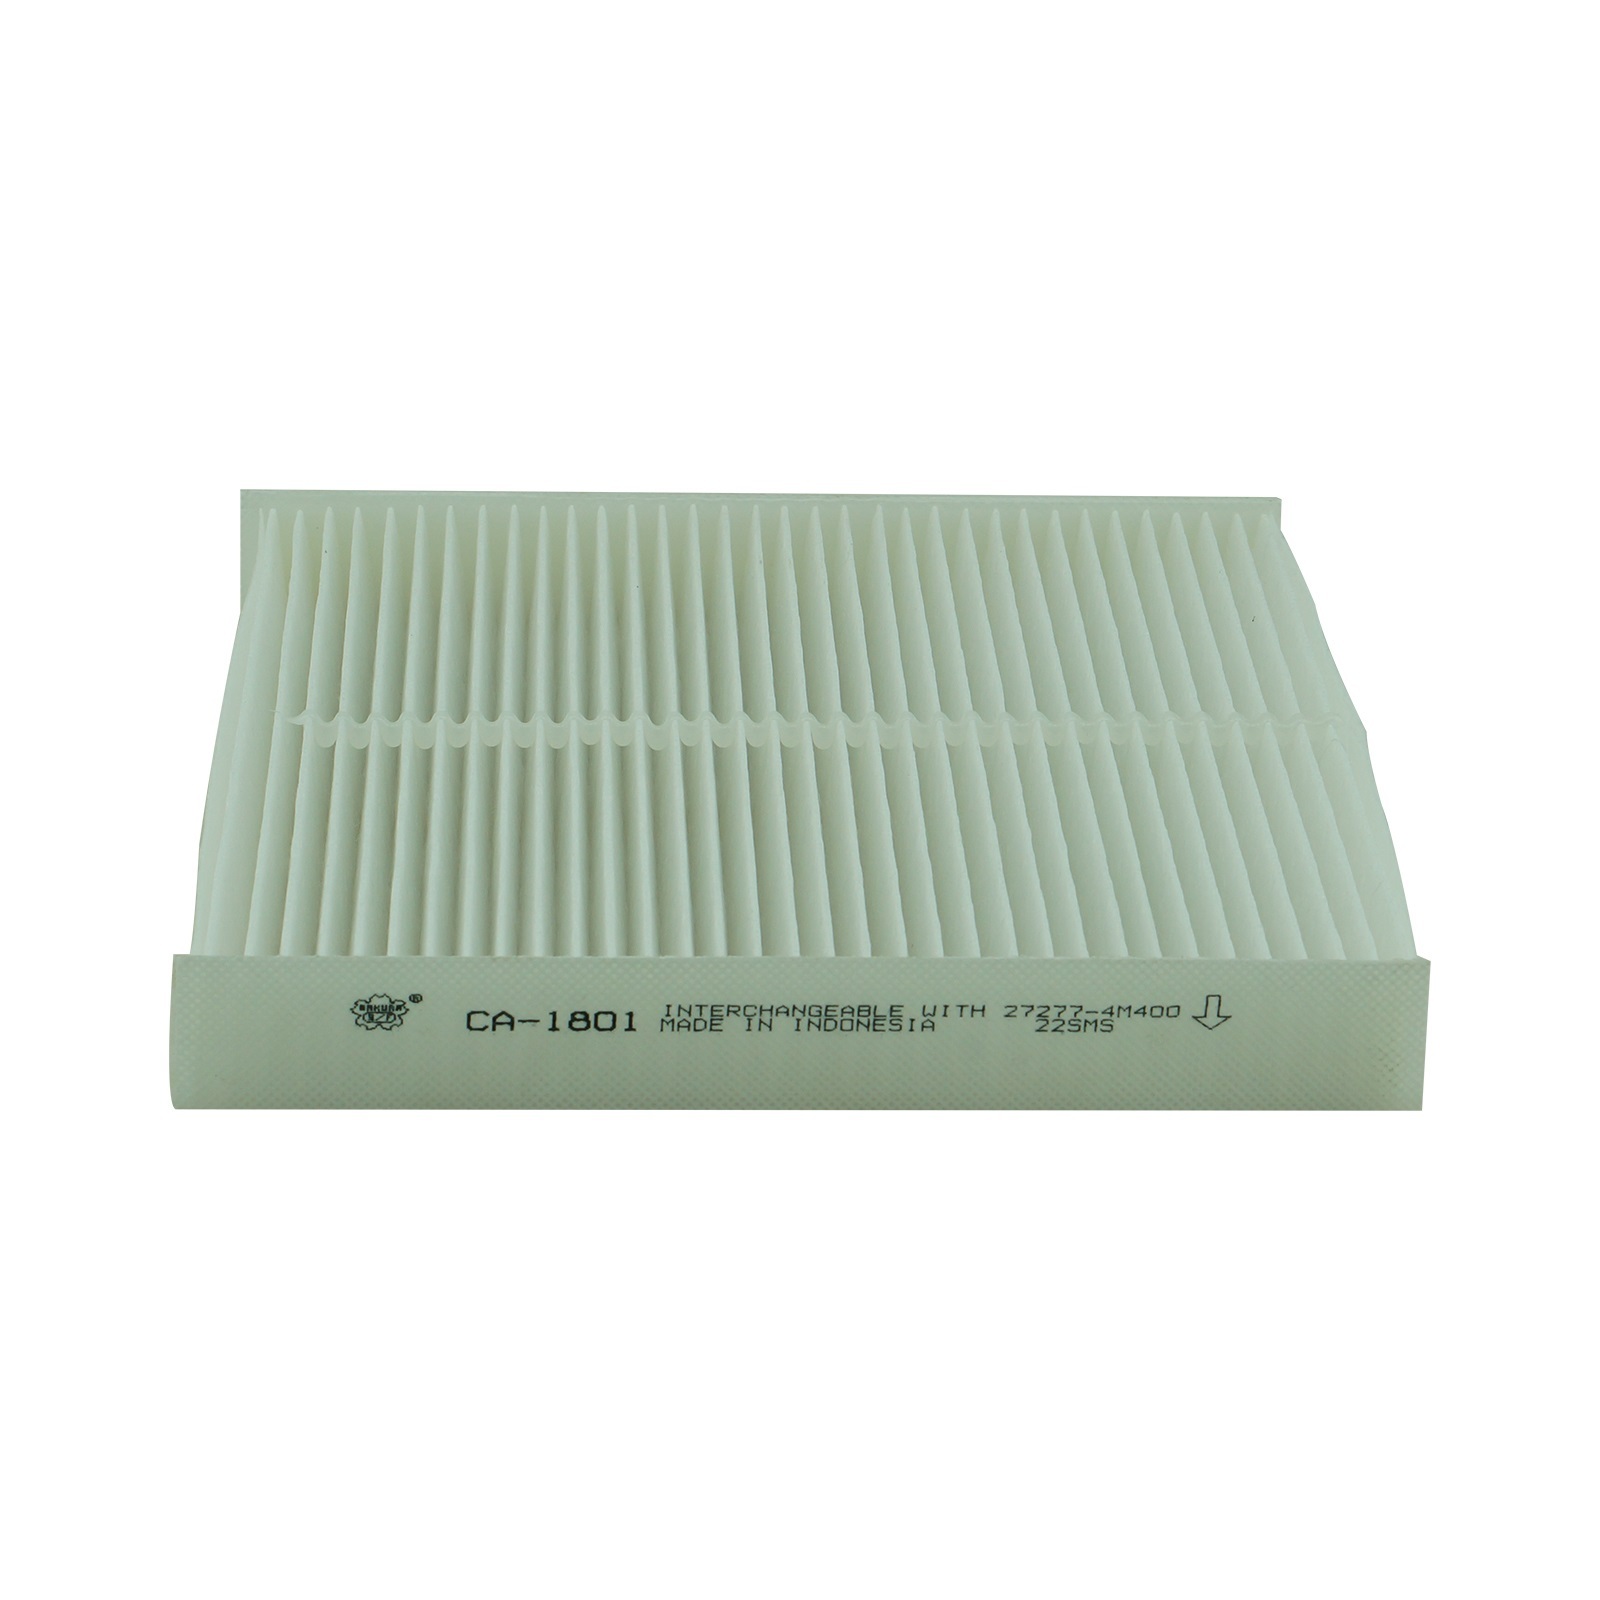 CAC-17140 Sakura Cabin Air Filter - Fits Ford + More Xref: RCA227P, UCY0-61-P11, WACF0172